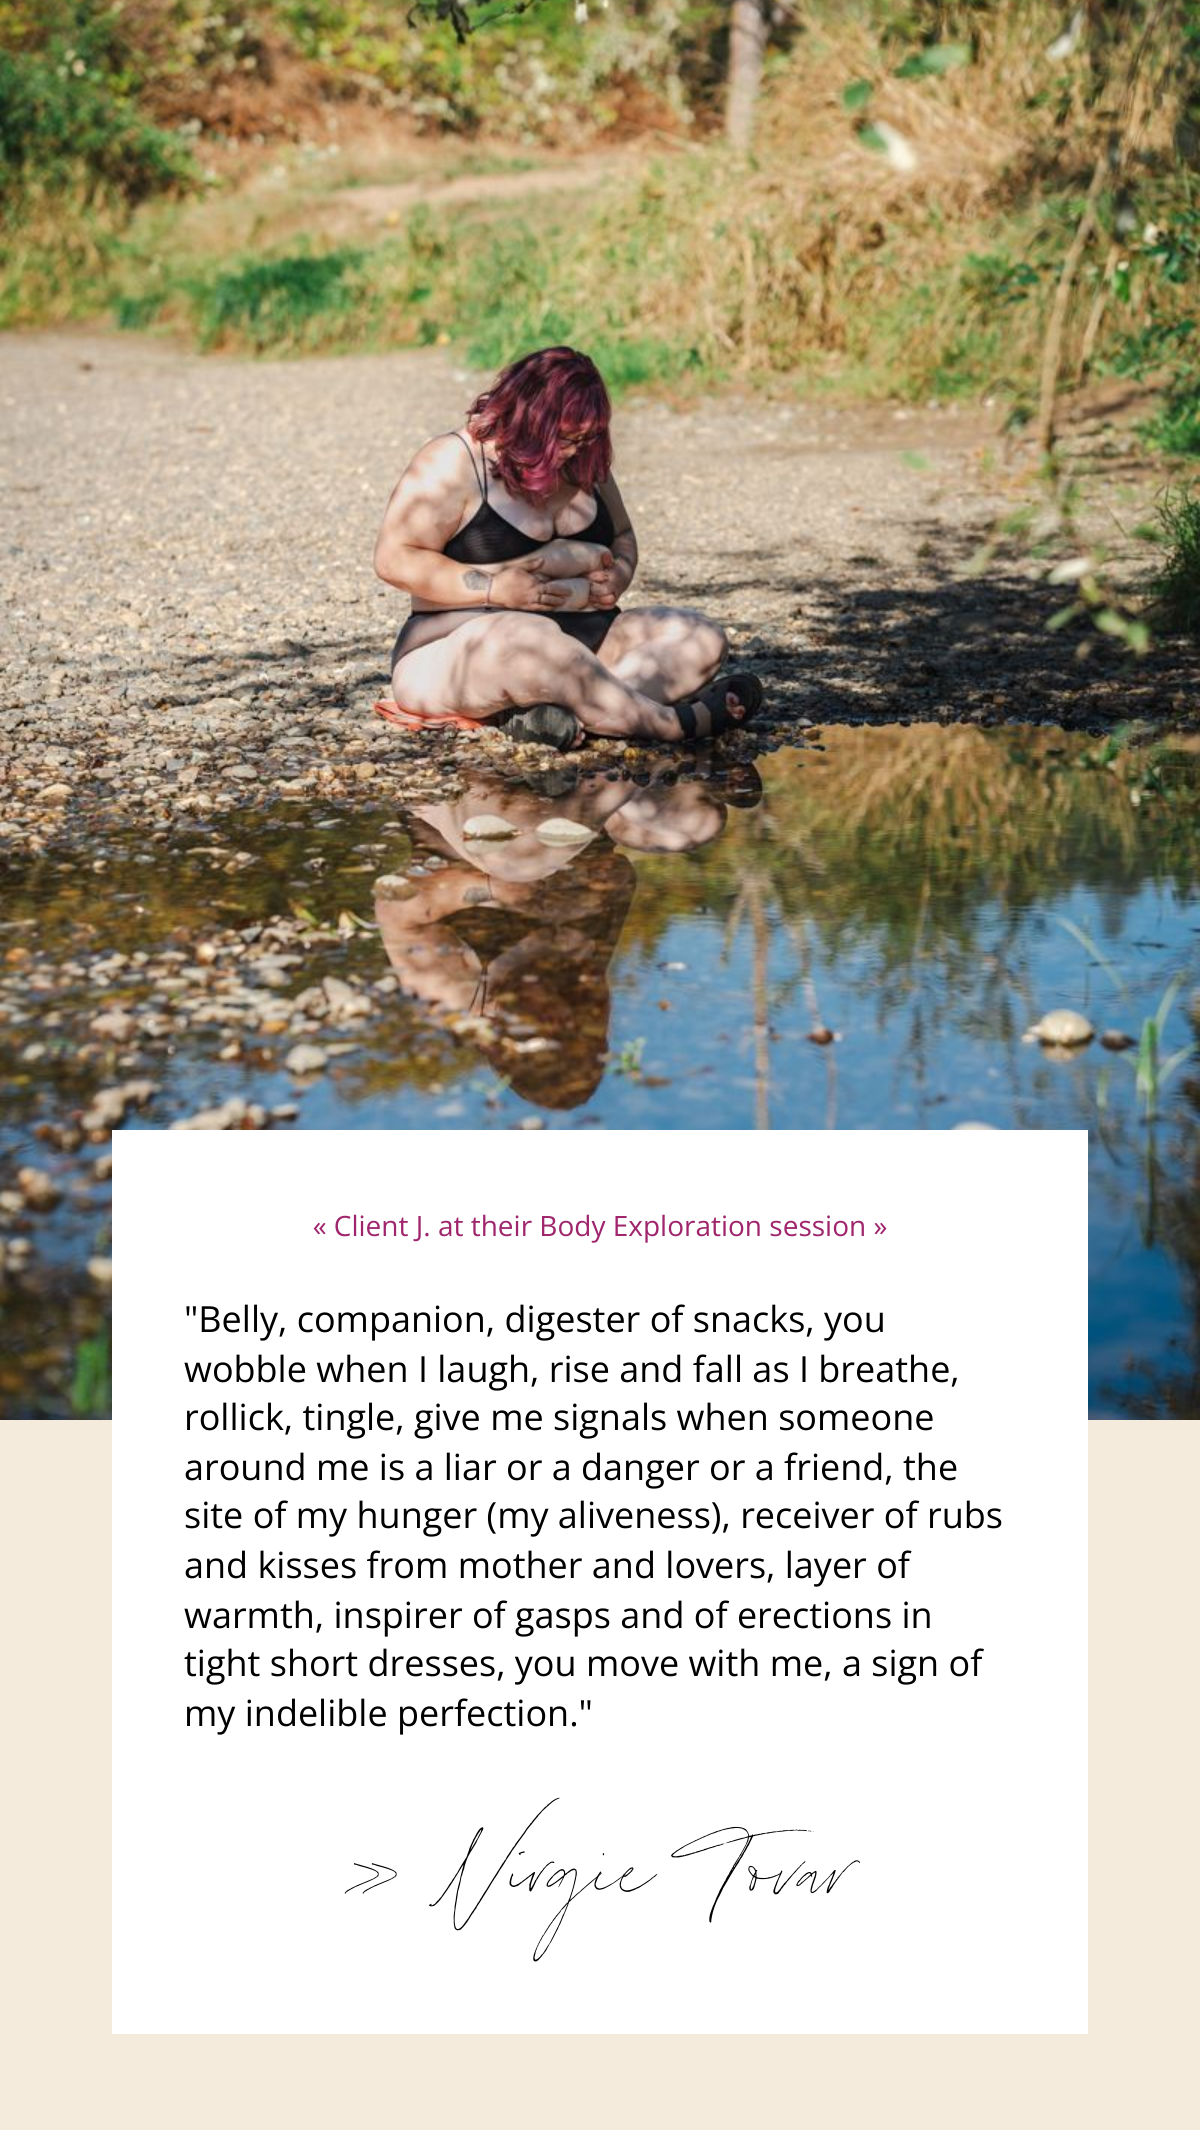 A photo of a fat white woman exploring her stomach rolls at a body positive photo session in the Pacific Northwest. Text reads, « Client J. at their Body Exploration session » "Belly, companion, digester of snacks, you wobble when I laugh, rise and fall as I breathe, rollick, tingle, give me signals when someone around me is a liar or a danger or a friend, the site of my hunger (my aliveness), receiver of rubs and kisses from mother and lovers, layer of warmth, inspirer of gasps and of erections in tight short dresses, you move with me, a sign of my indelible perfection." » Virgie Tovar